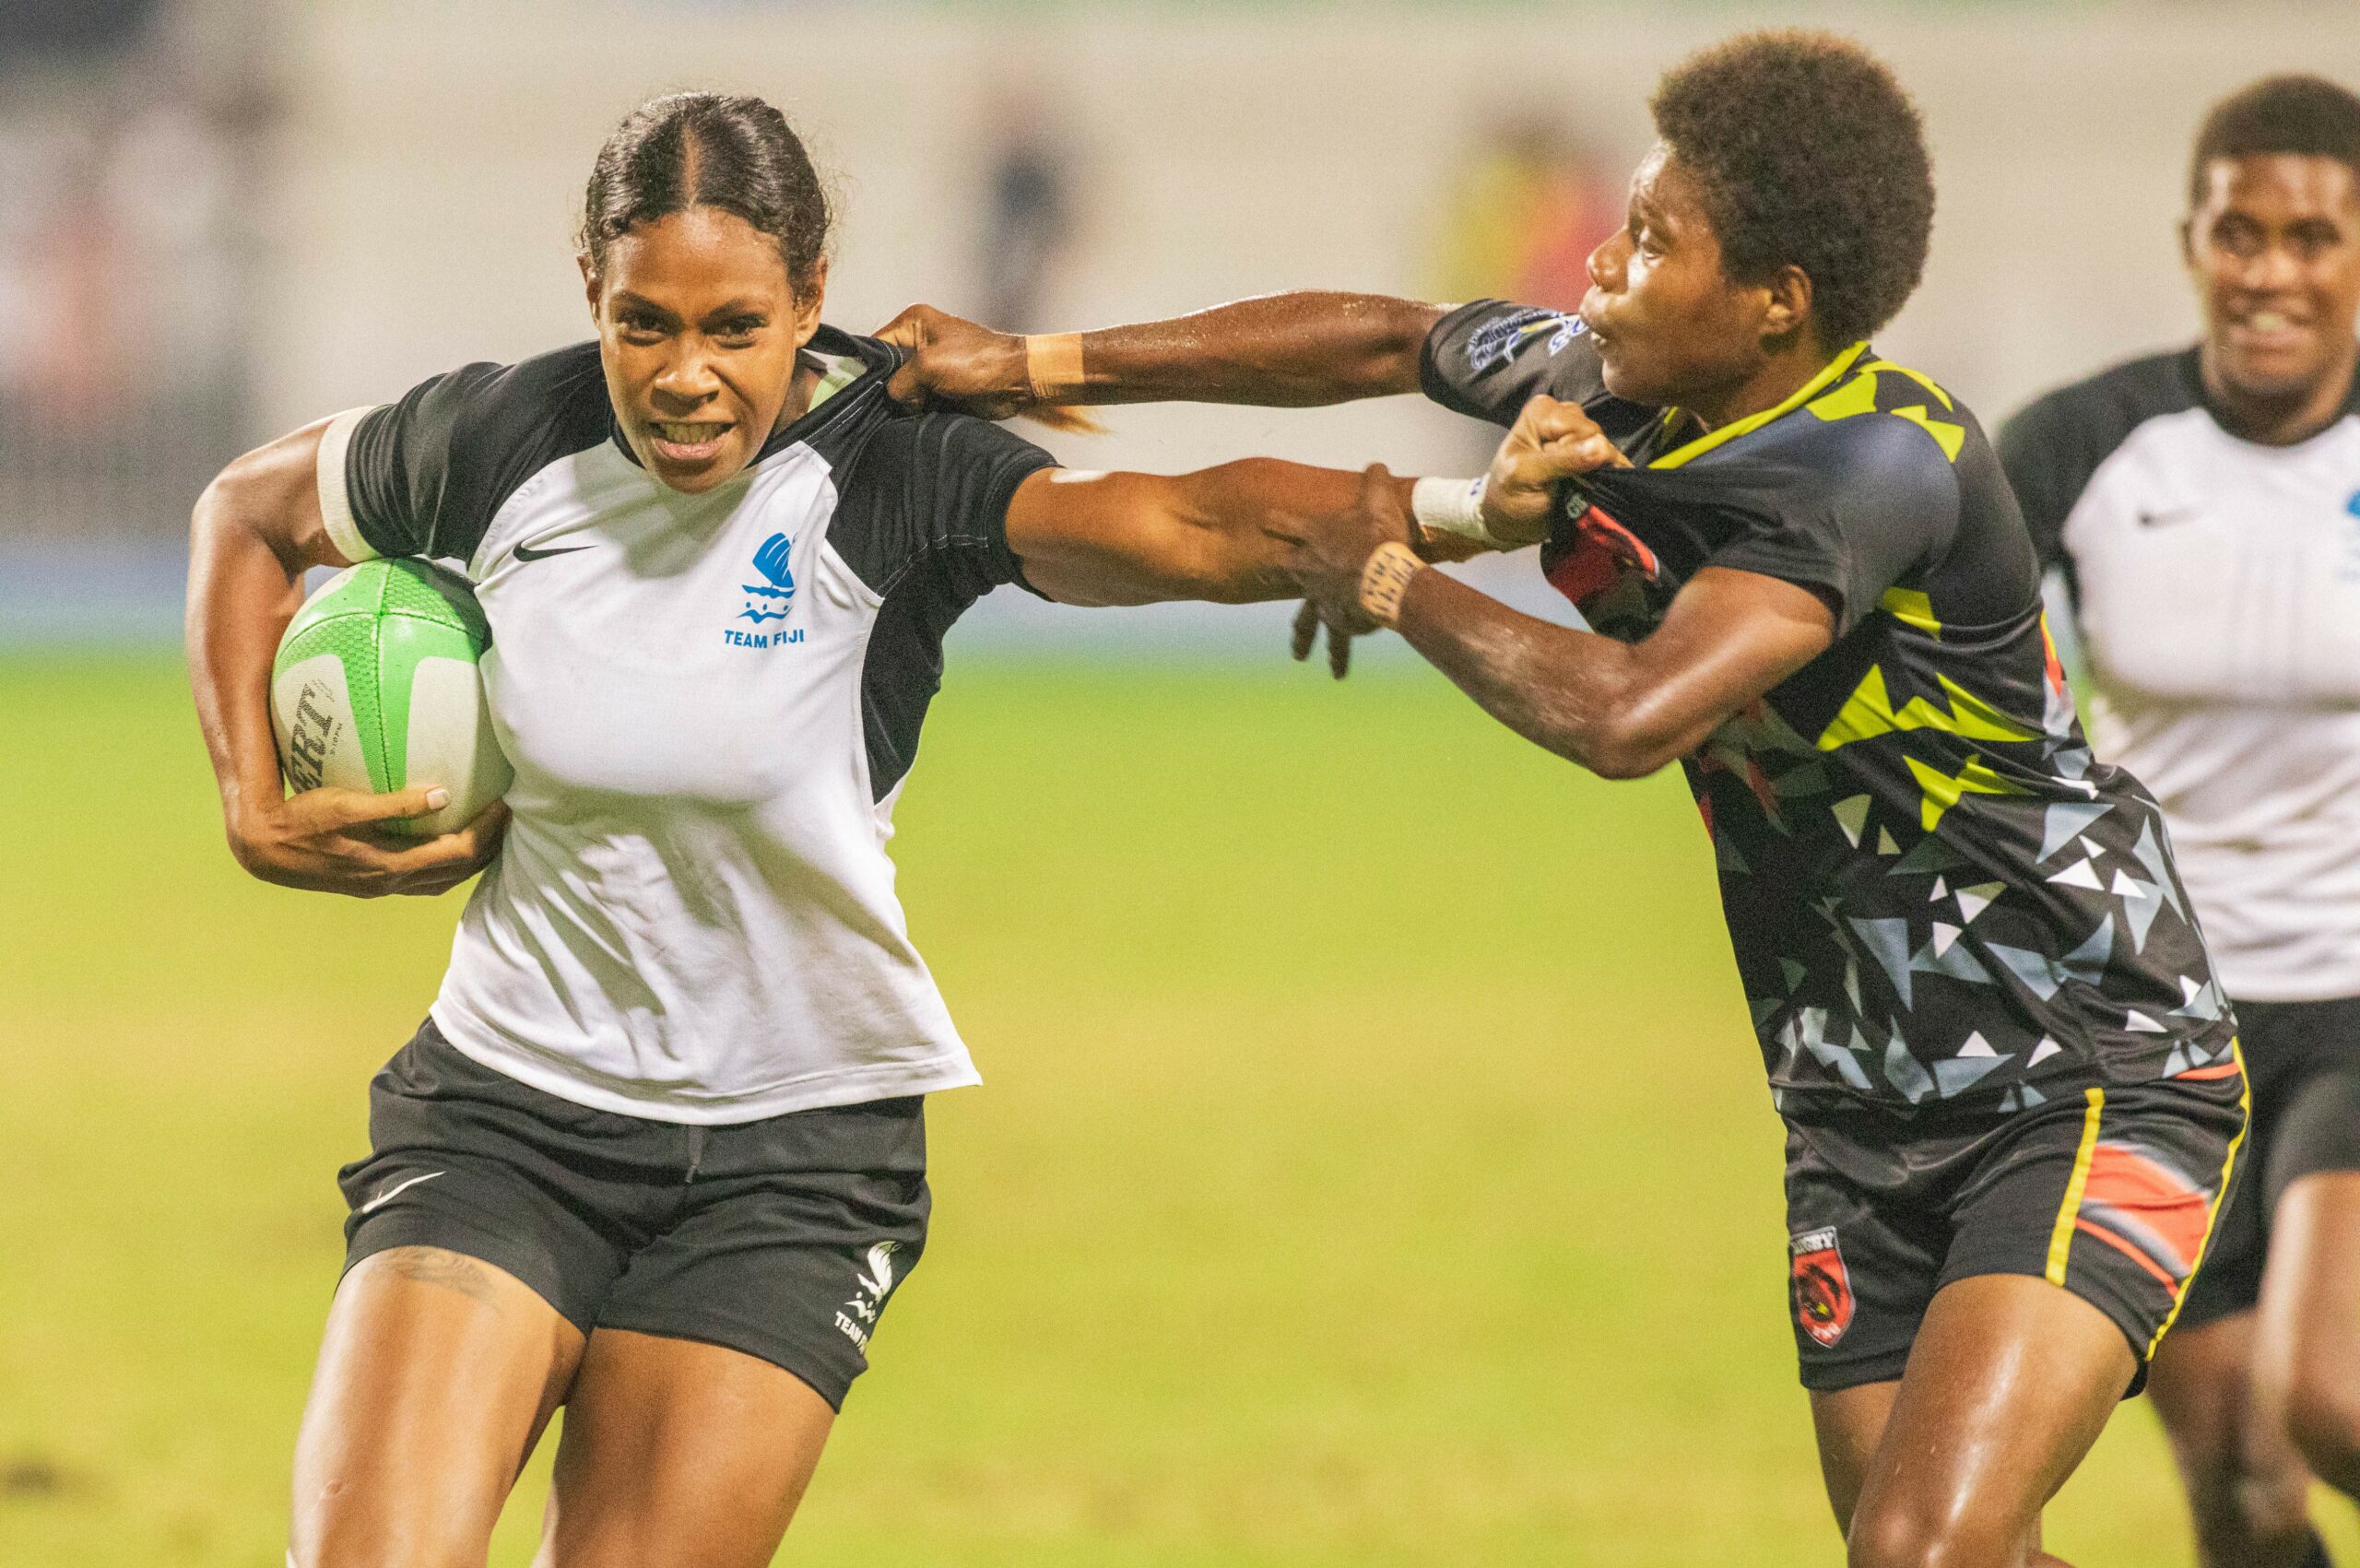 Women playing rugby 7s